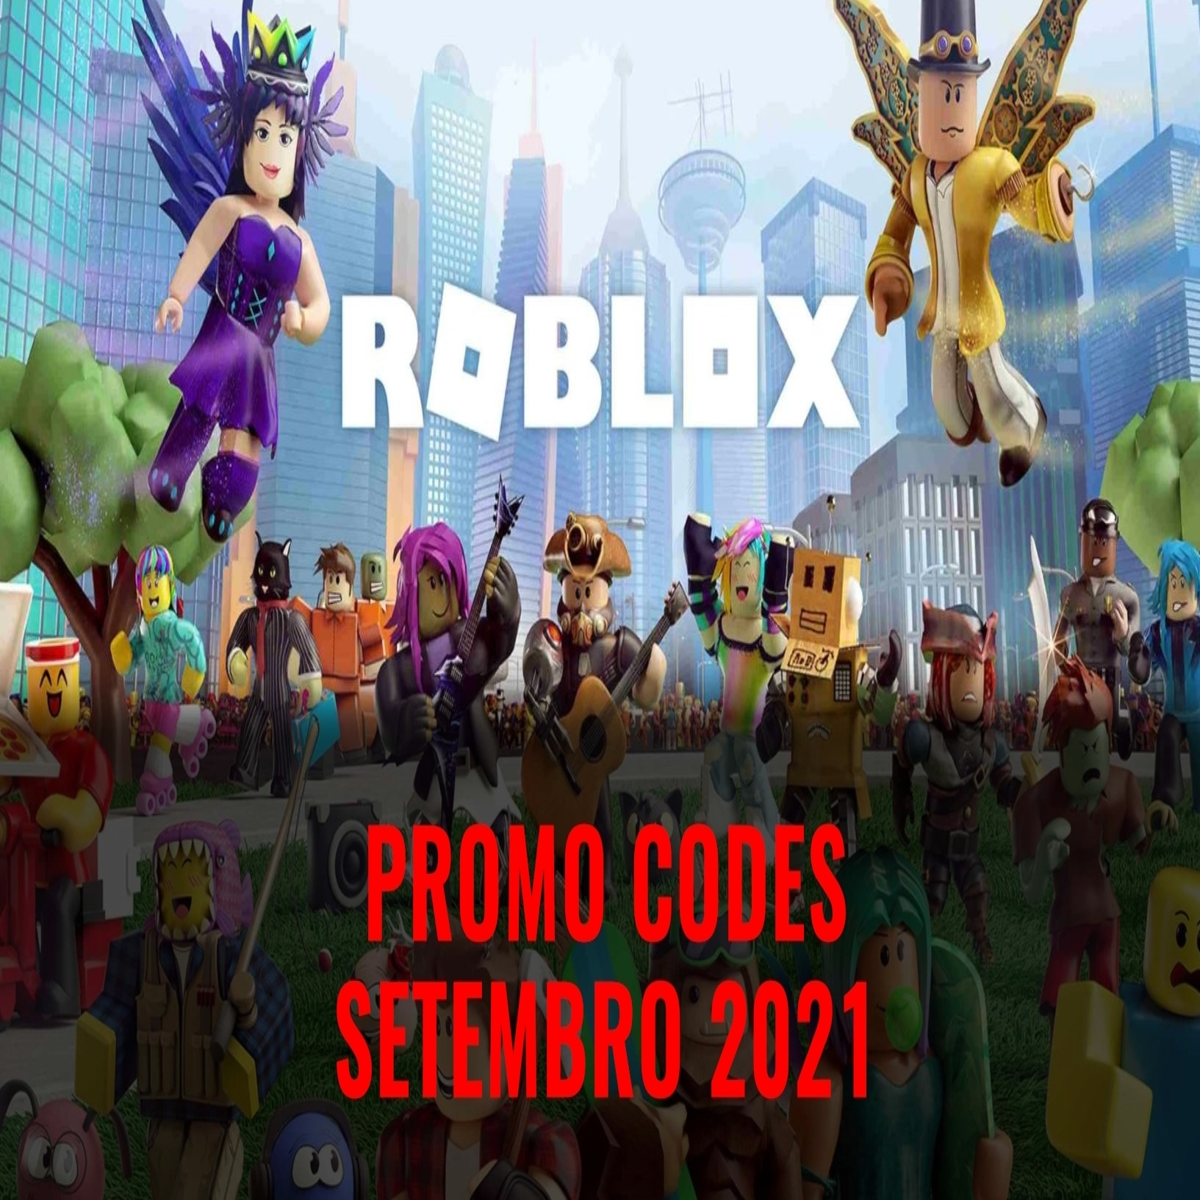 Code Roblox New / Mansion of Wonder 2023 in 2023